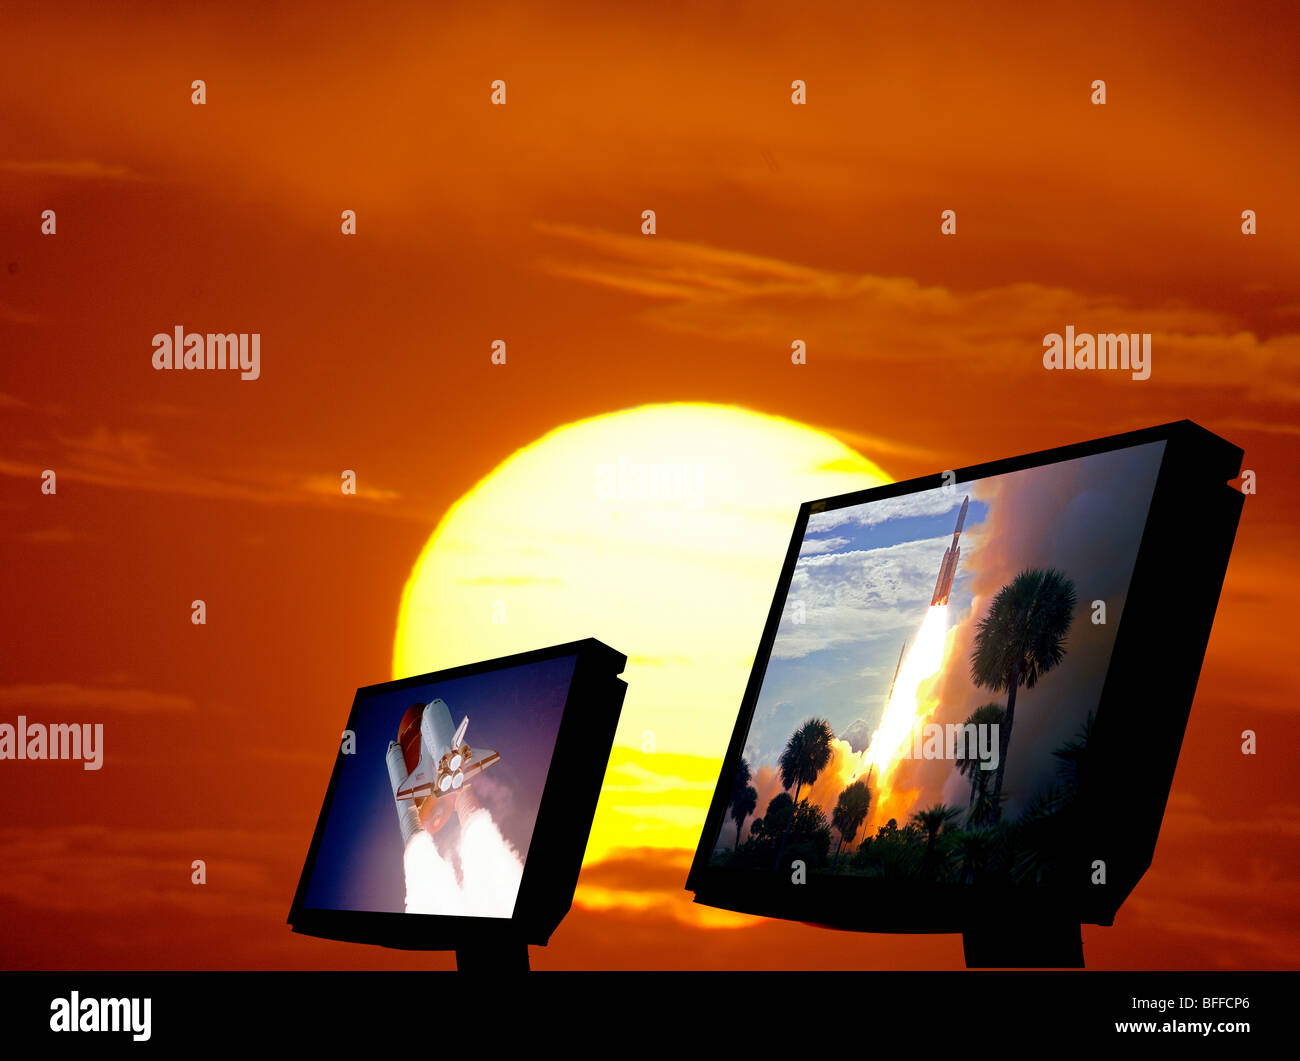 twin computer screens showing NASA shuttle launch images at sunset Stock Photo